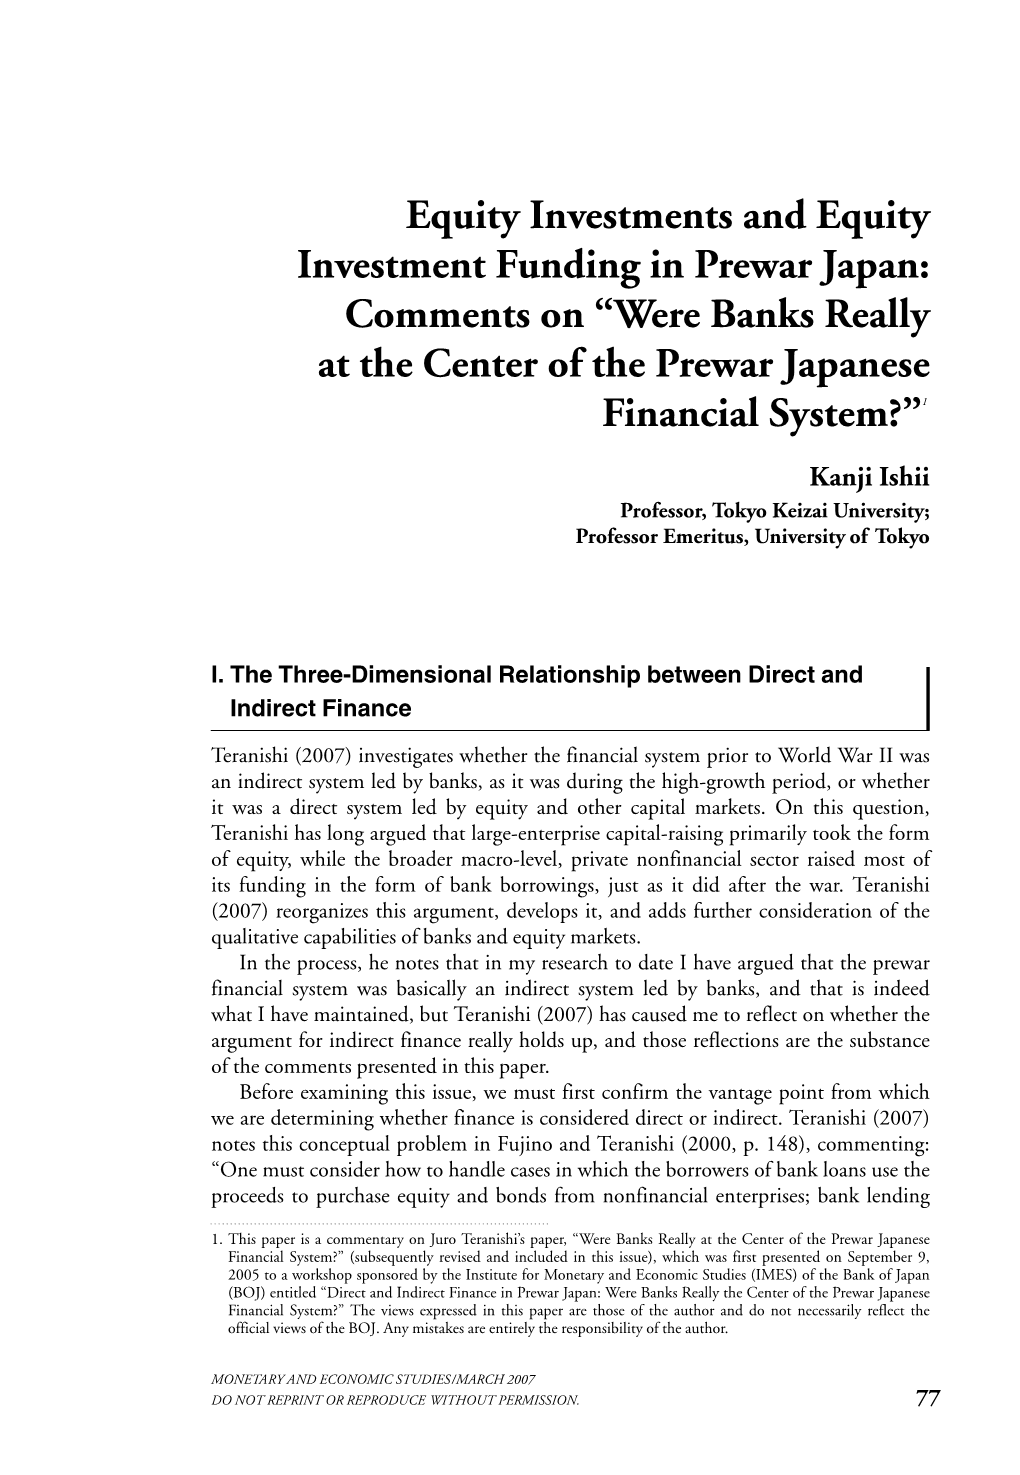 Equity Investments and Equity Investment Funding in Prewar Japan: Comments on “Were Banks Really at the Center of the Prewar Japanese Financial System?”1